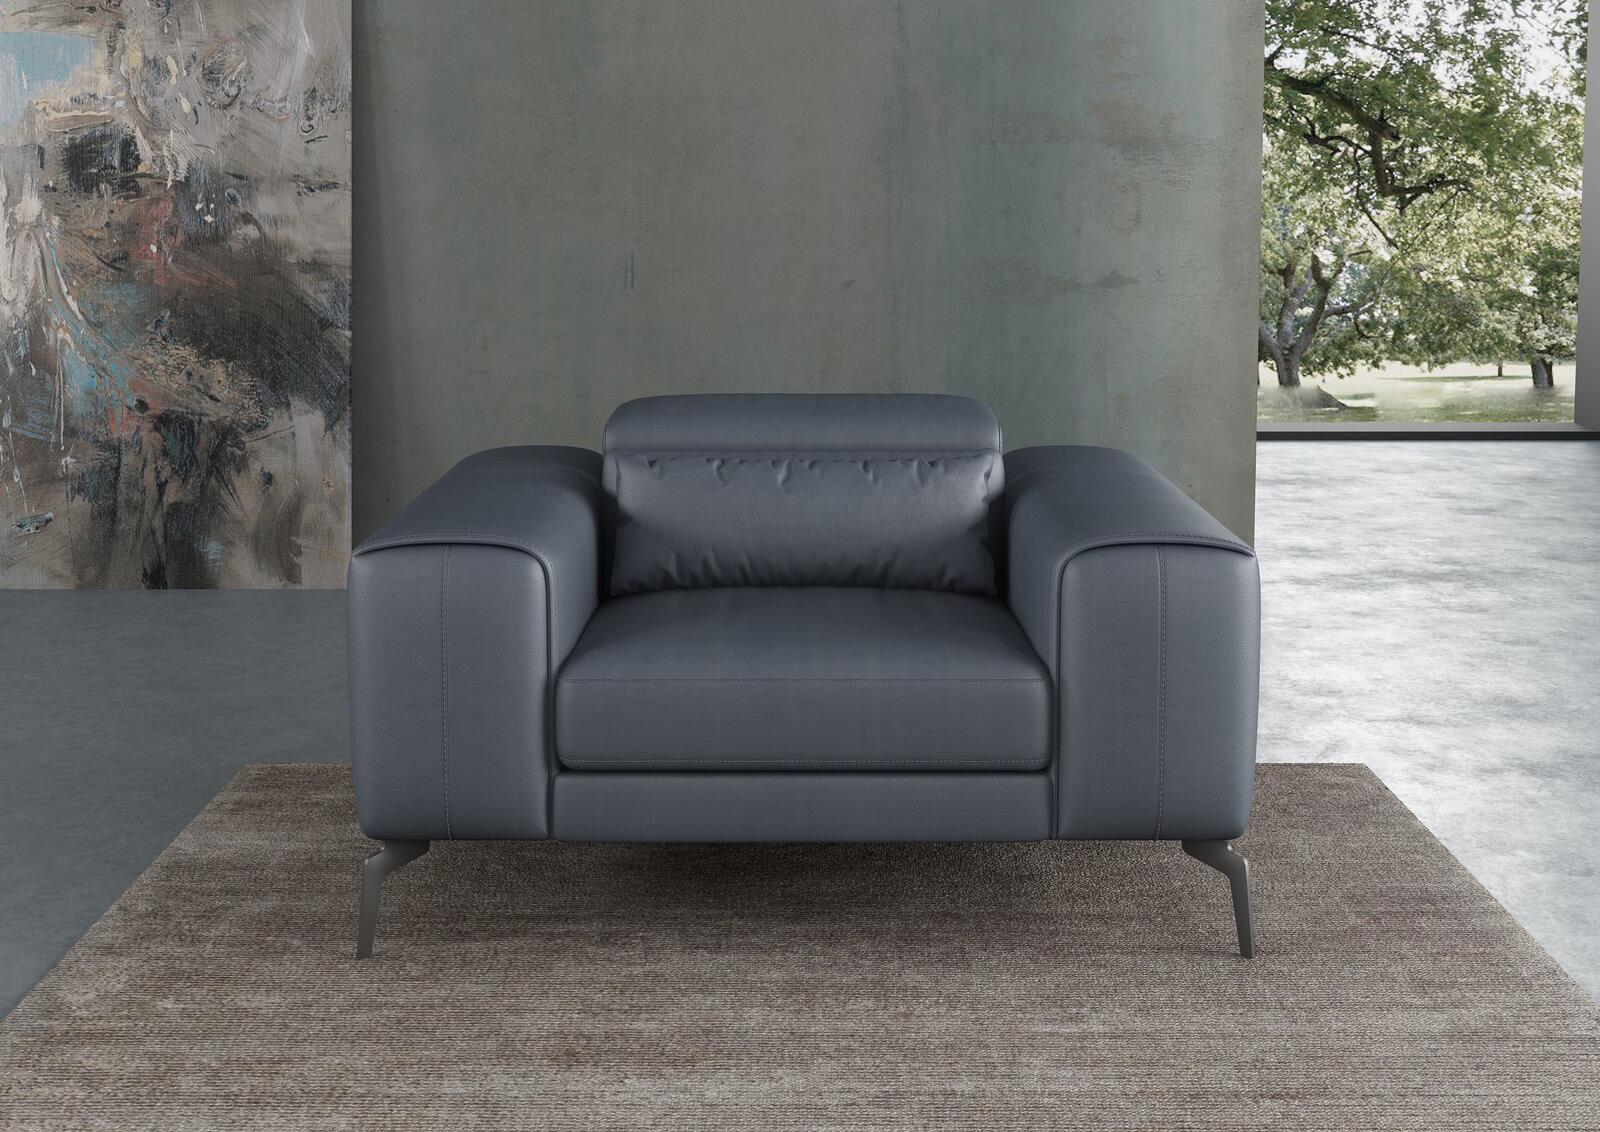 Contemporary, Modern Arm Chair CAVOUR EF-12550-C in Smoke, Gray Leather